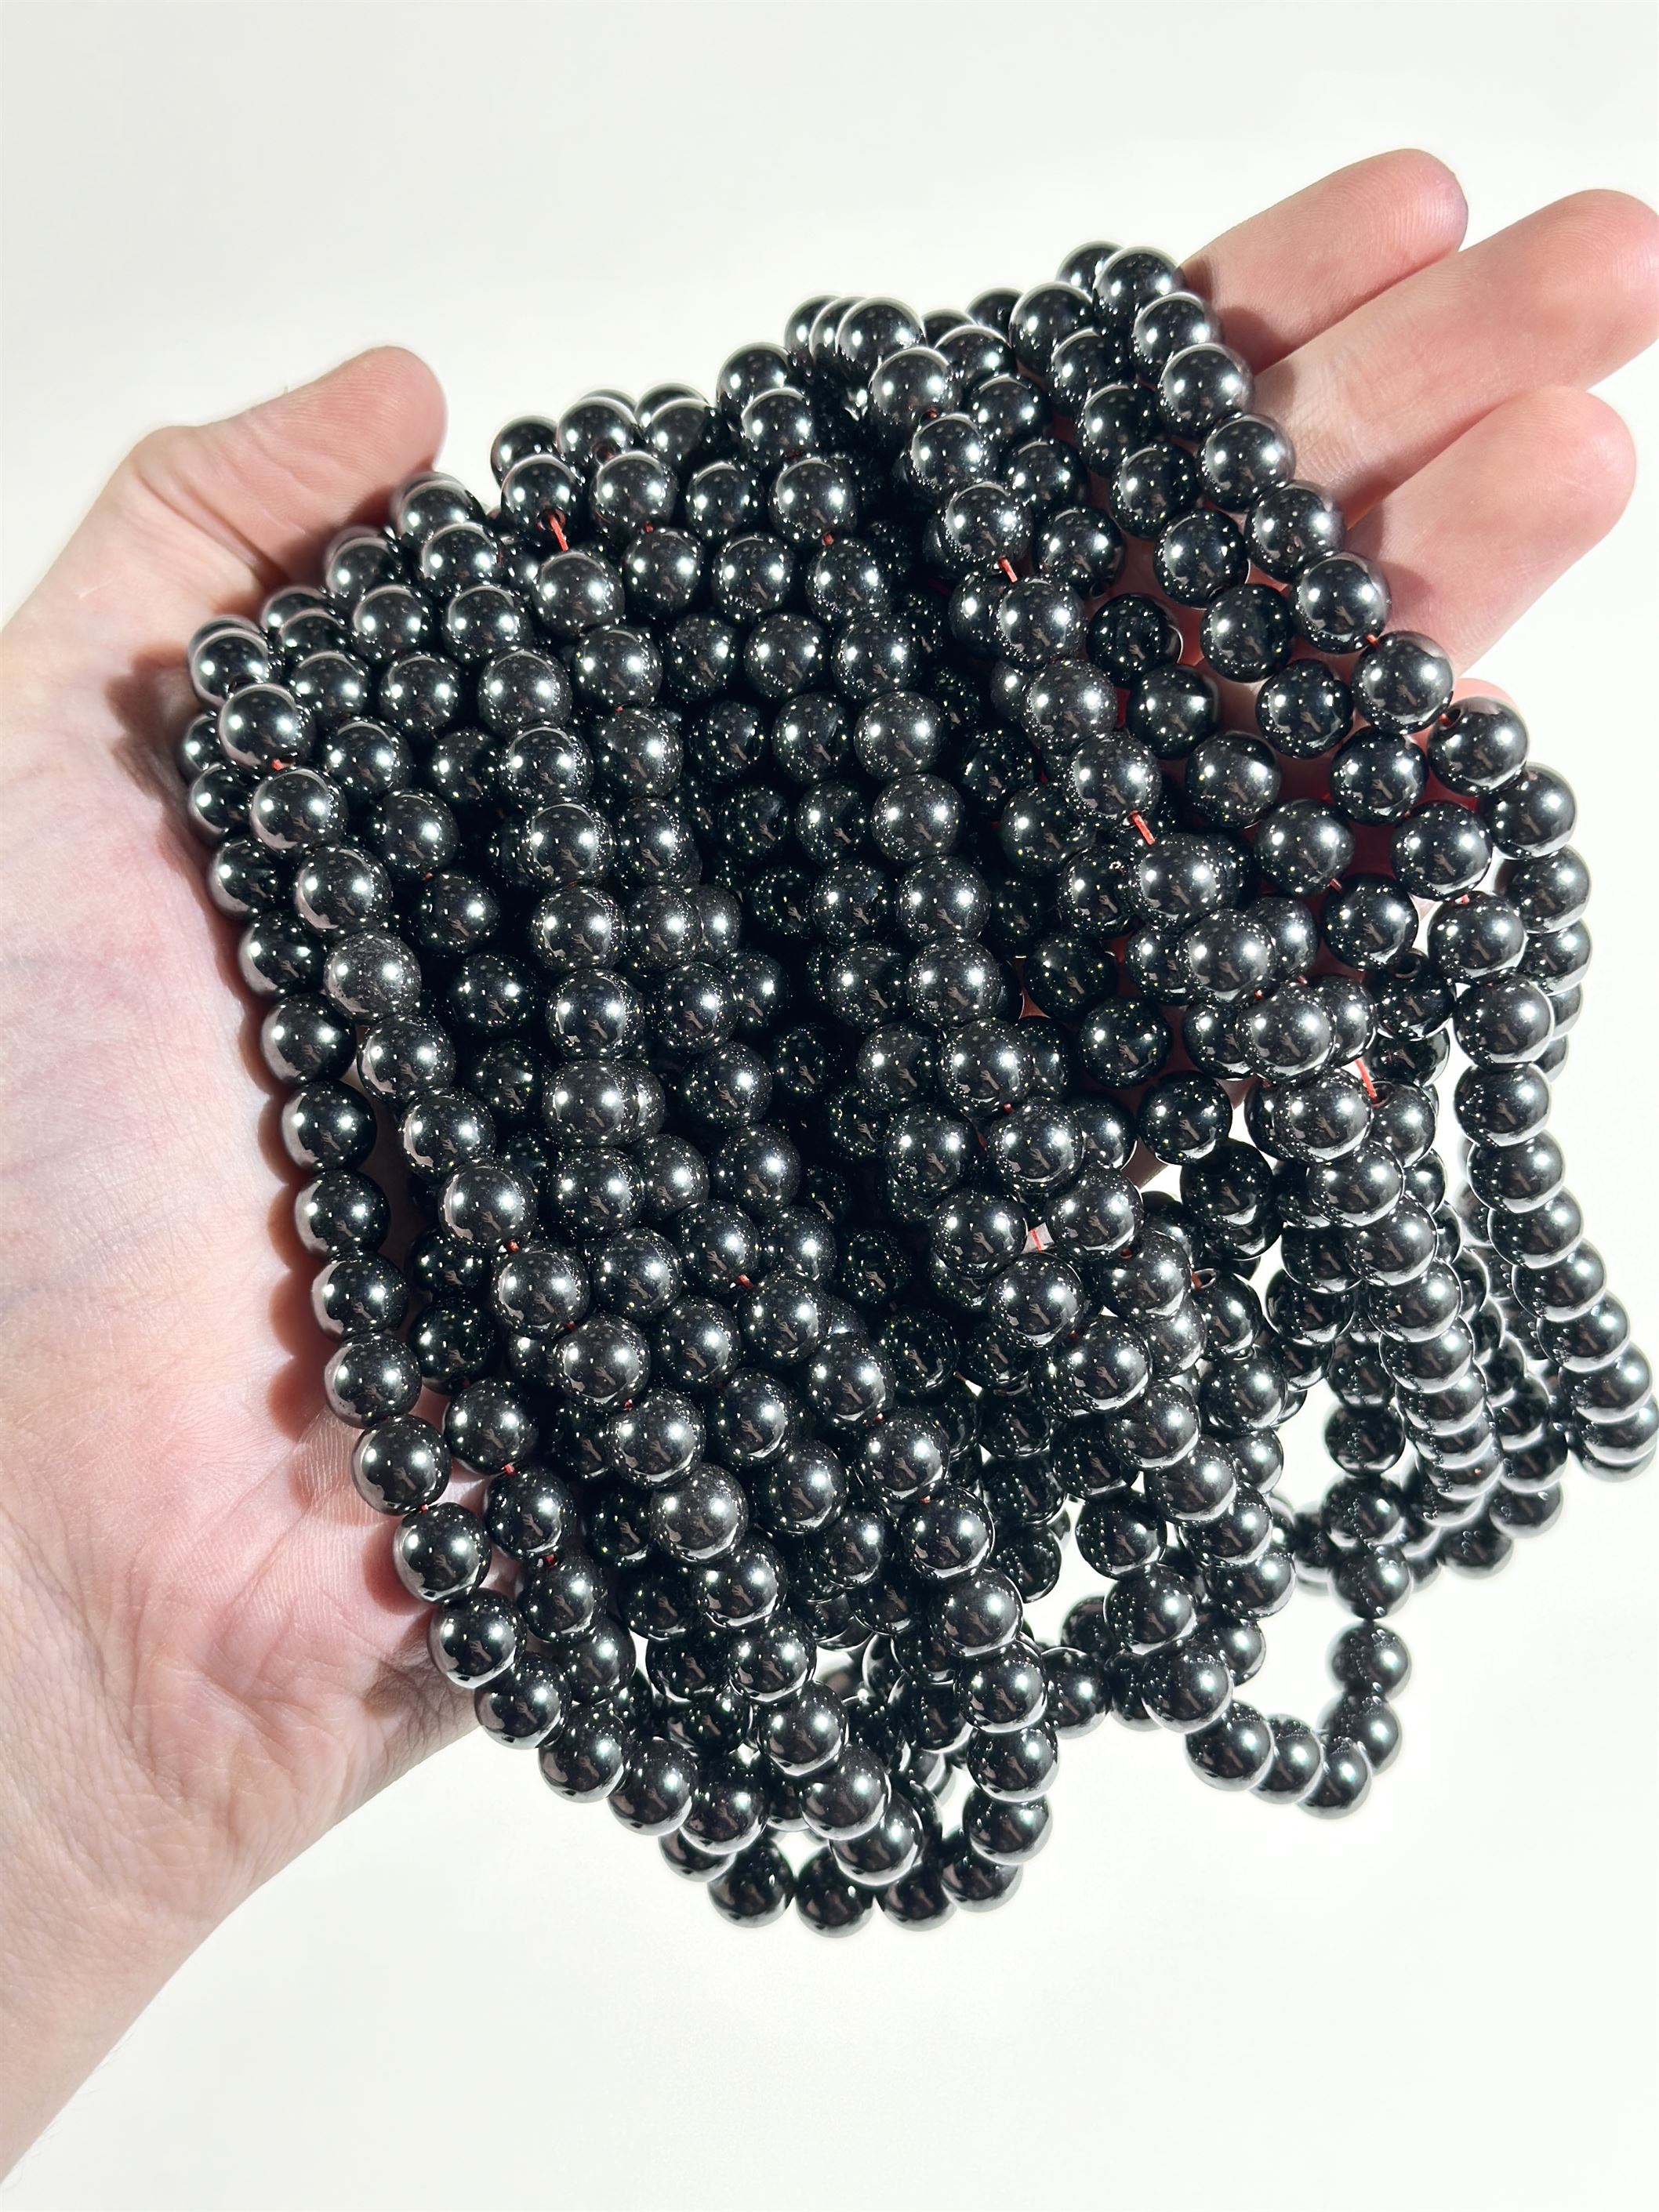 Thebeadchest Heart-Shaped Non-Magnetic Hematite Beads 5mm Grey Unusual Gemstone 16 inch Strand, Adult Unisex, Size: One Size